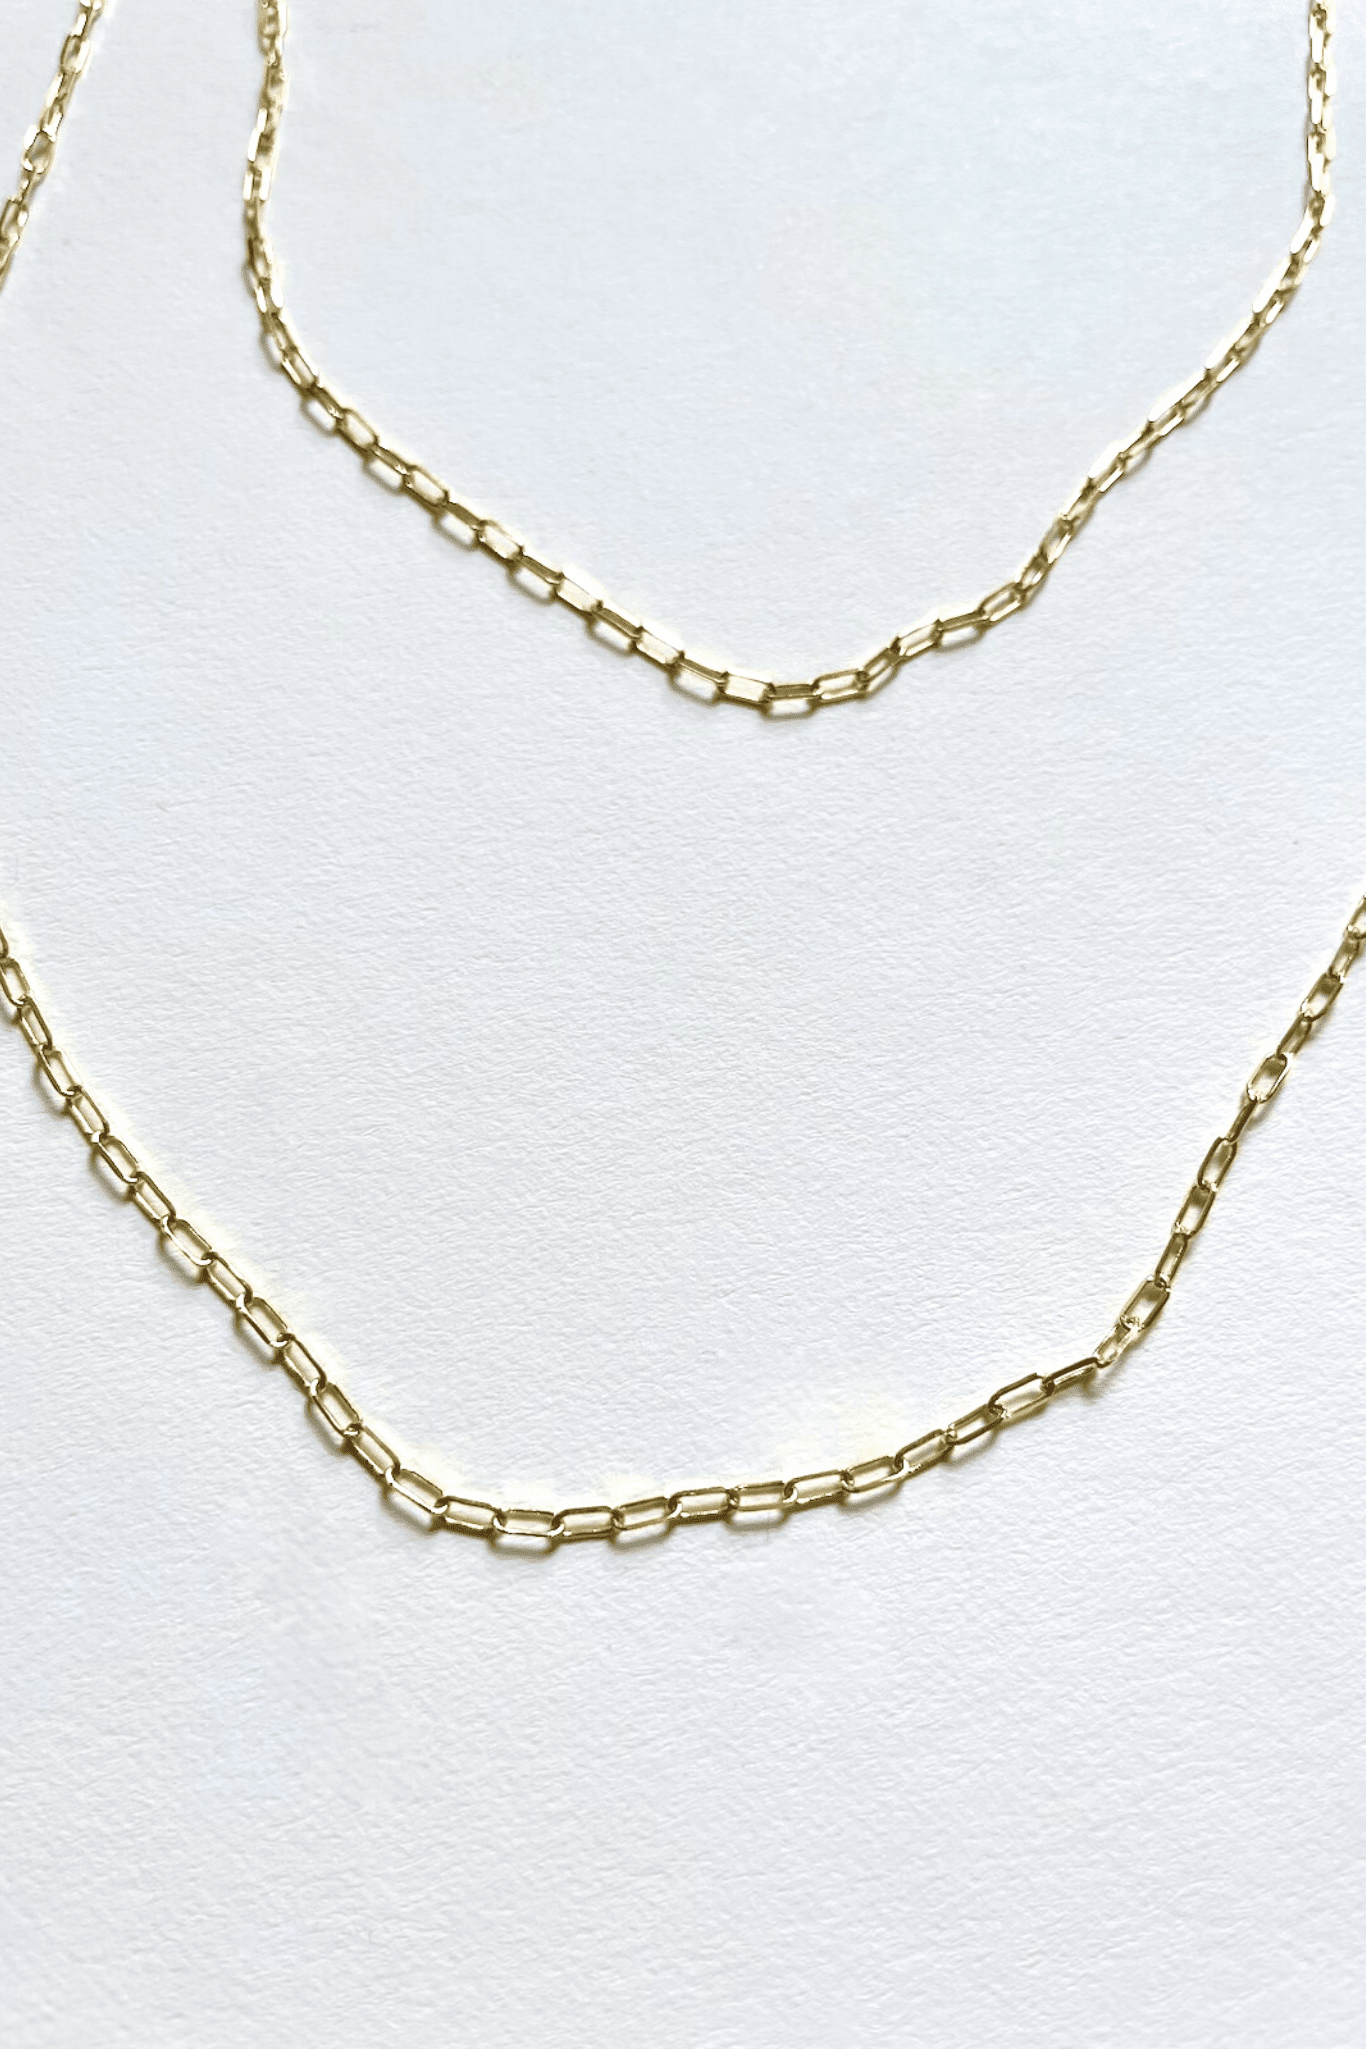 Carrie Hoffman - 14K Mini Paperclip Chain